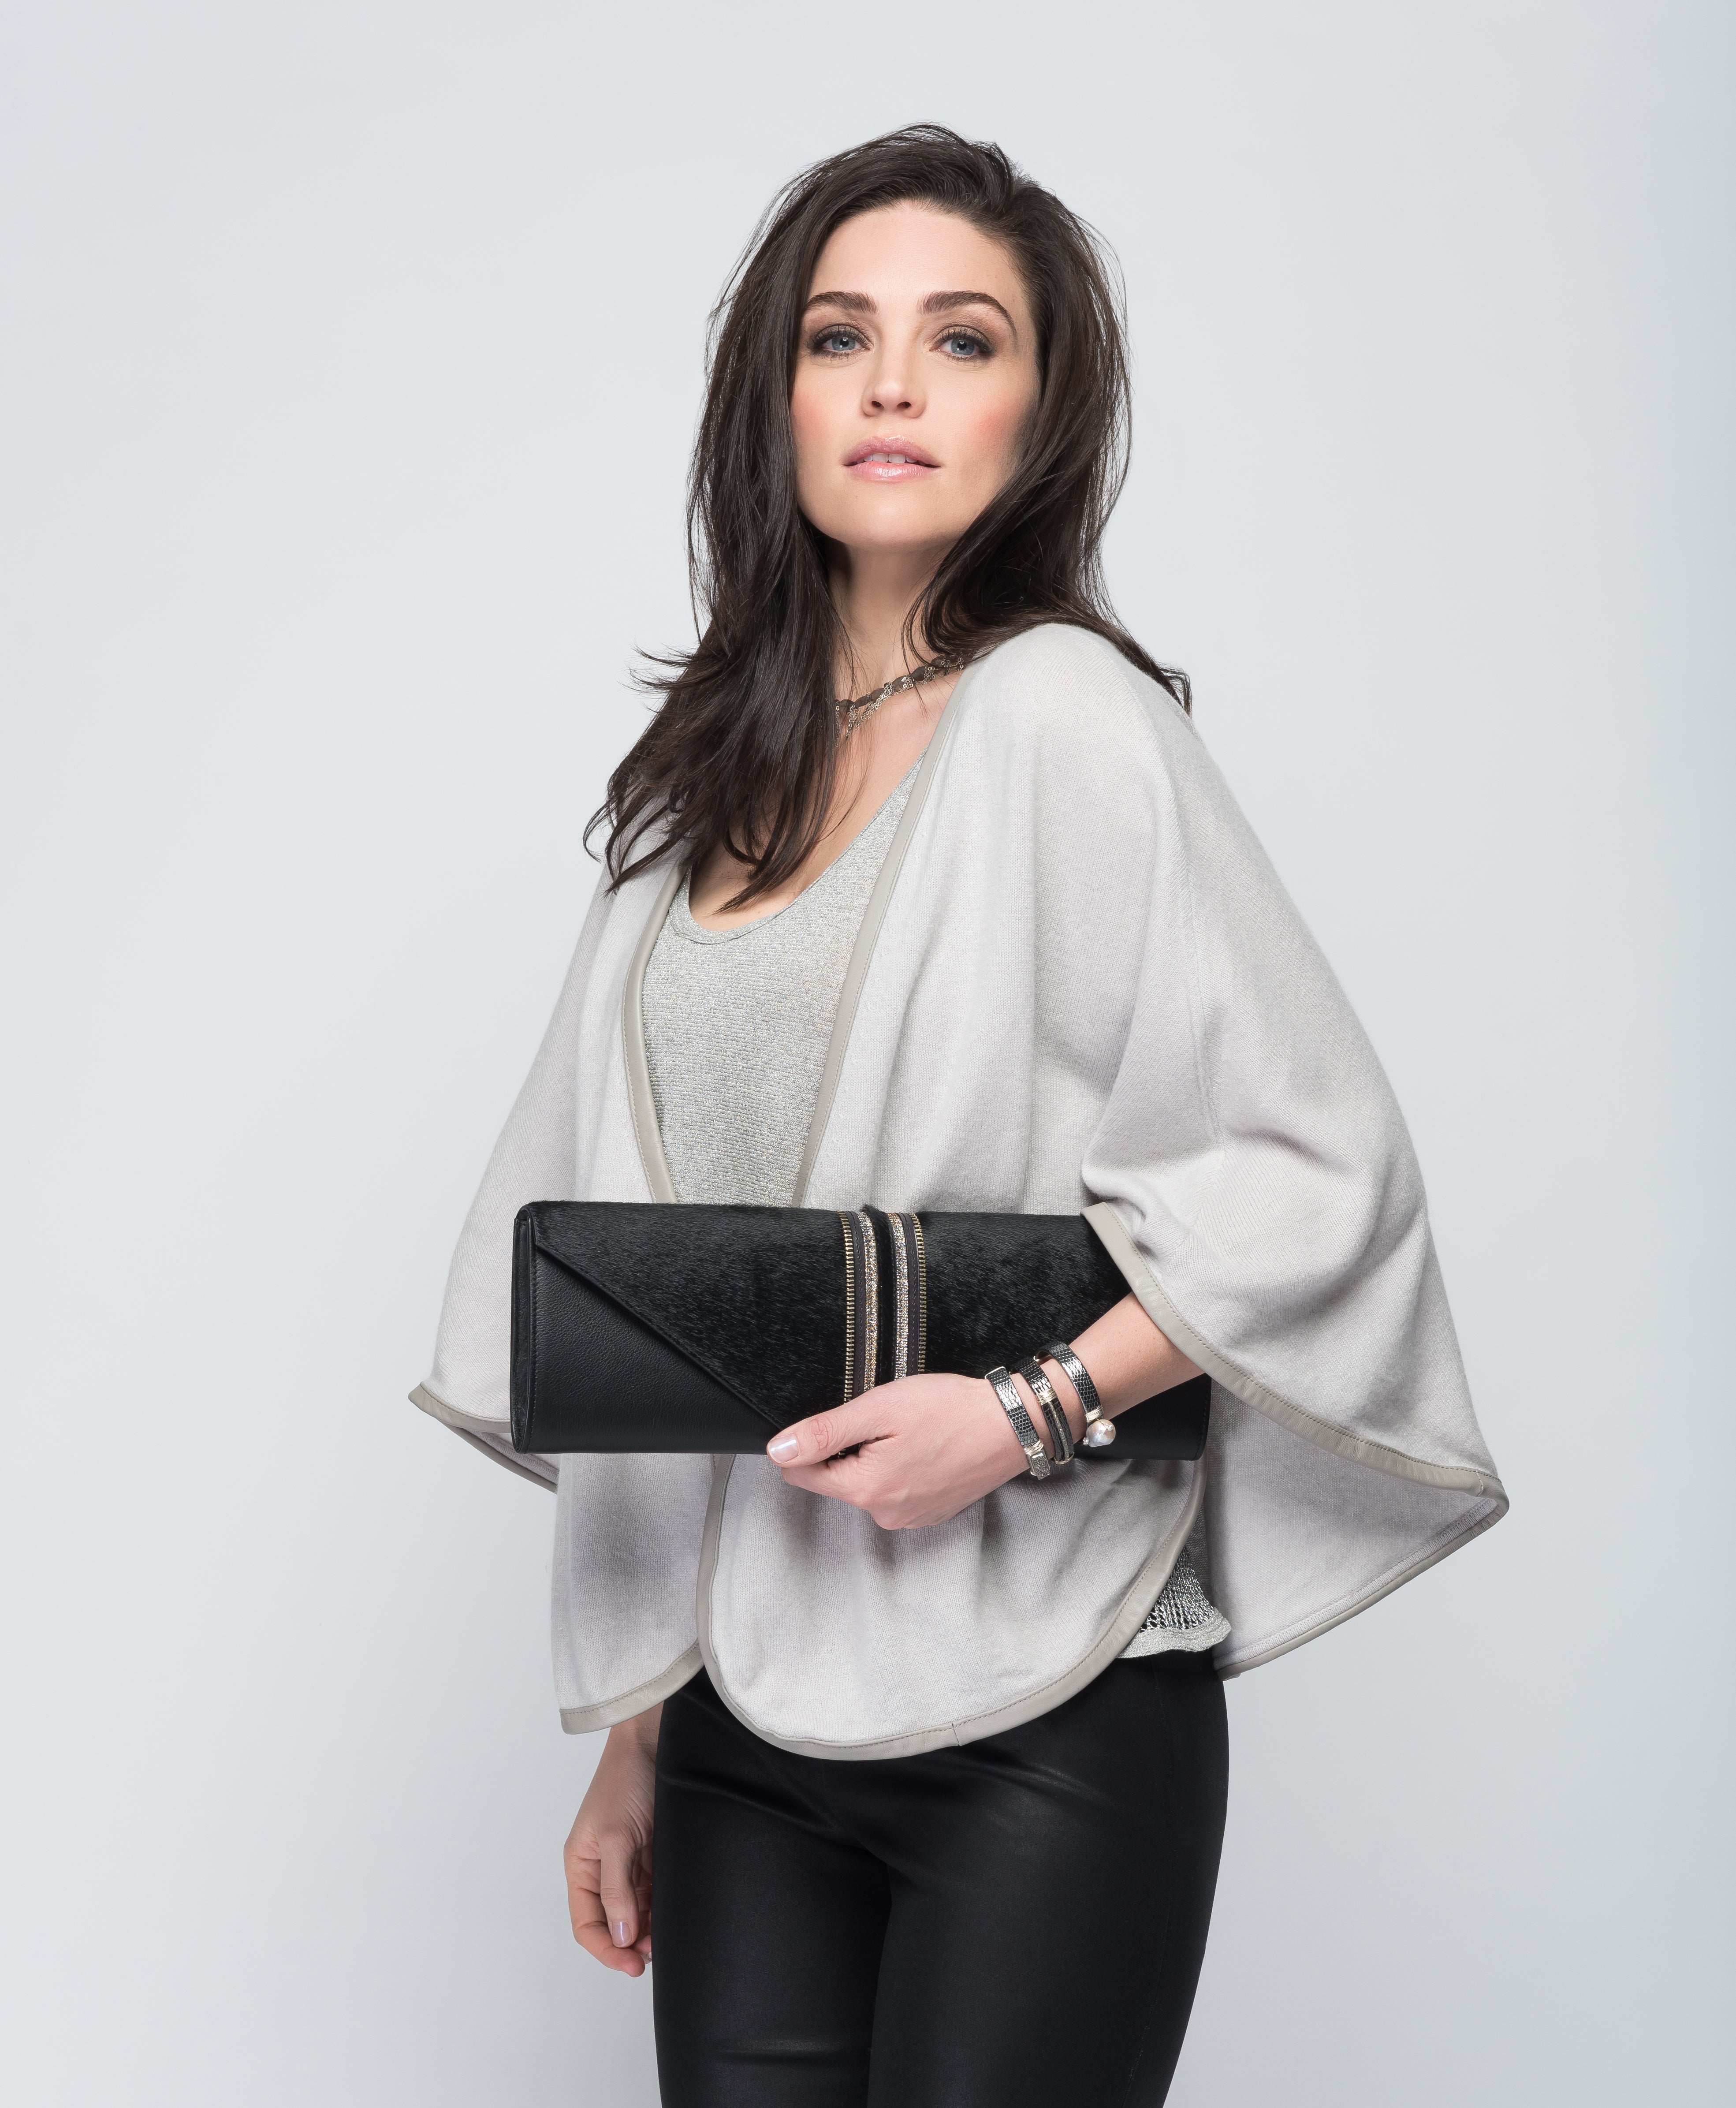 Cashmere Cape with Full Leather Trim in Dove Gray